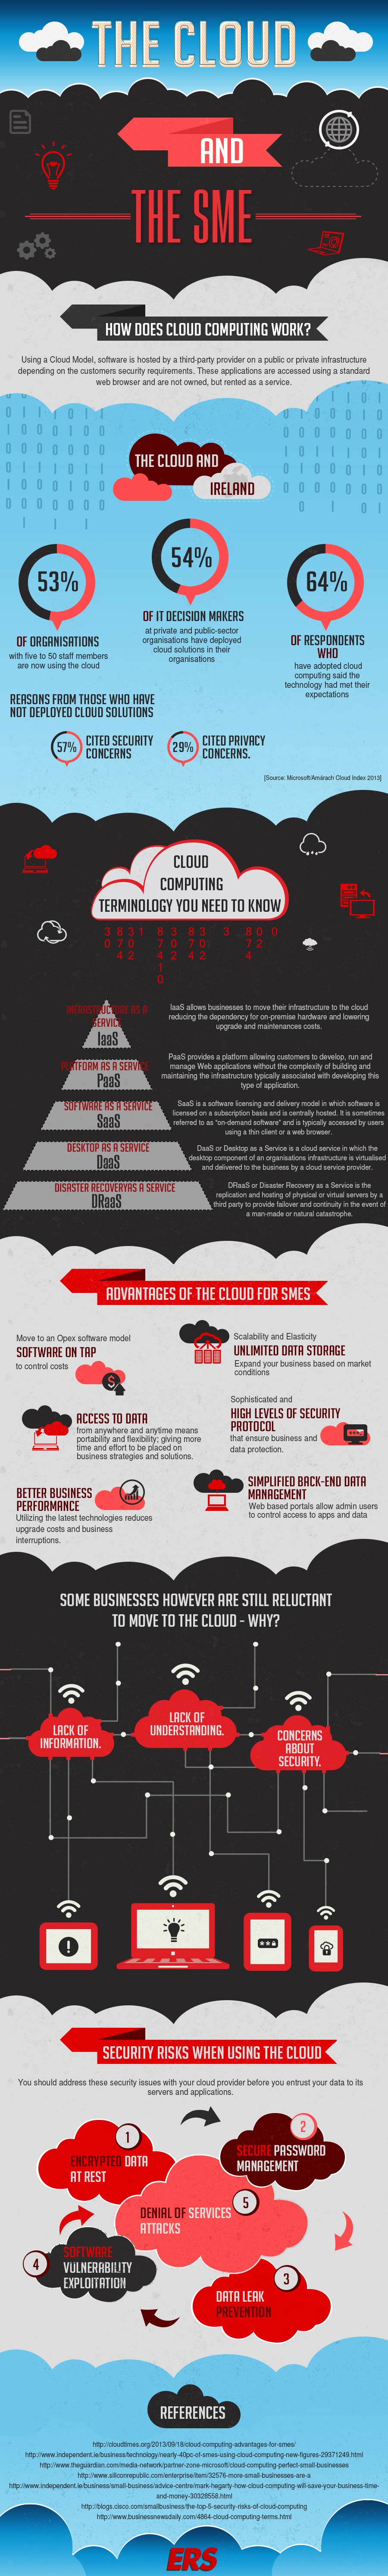 The-Cloud-and-the-SME